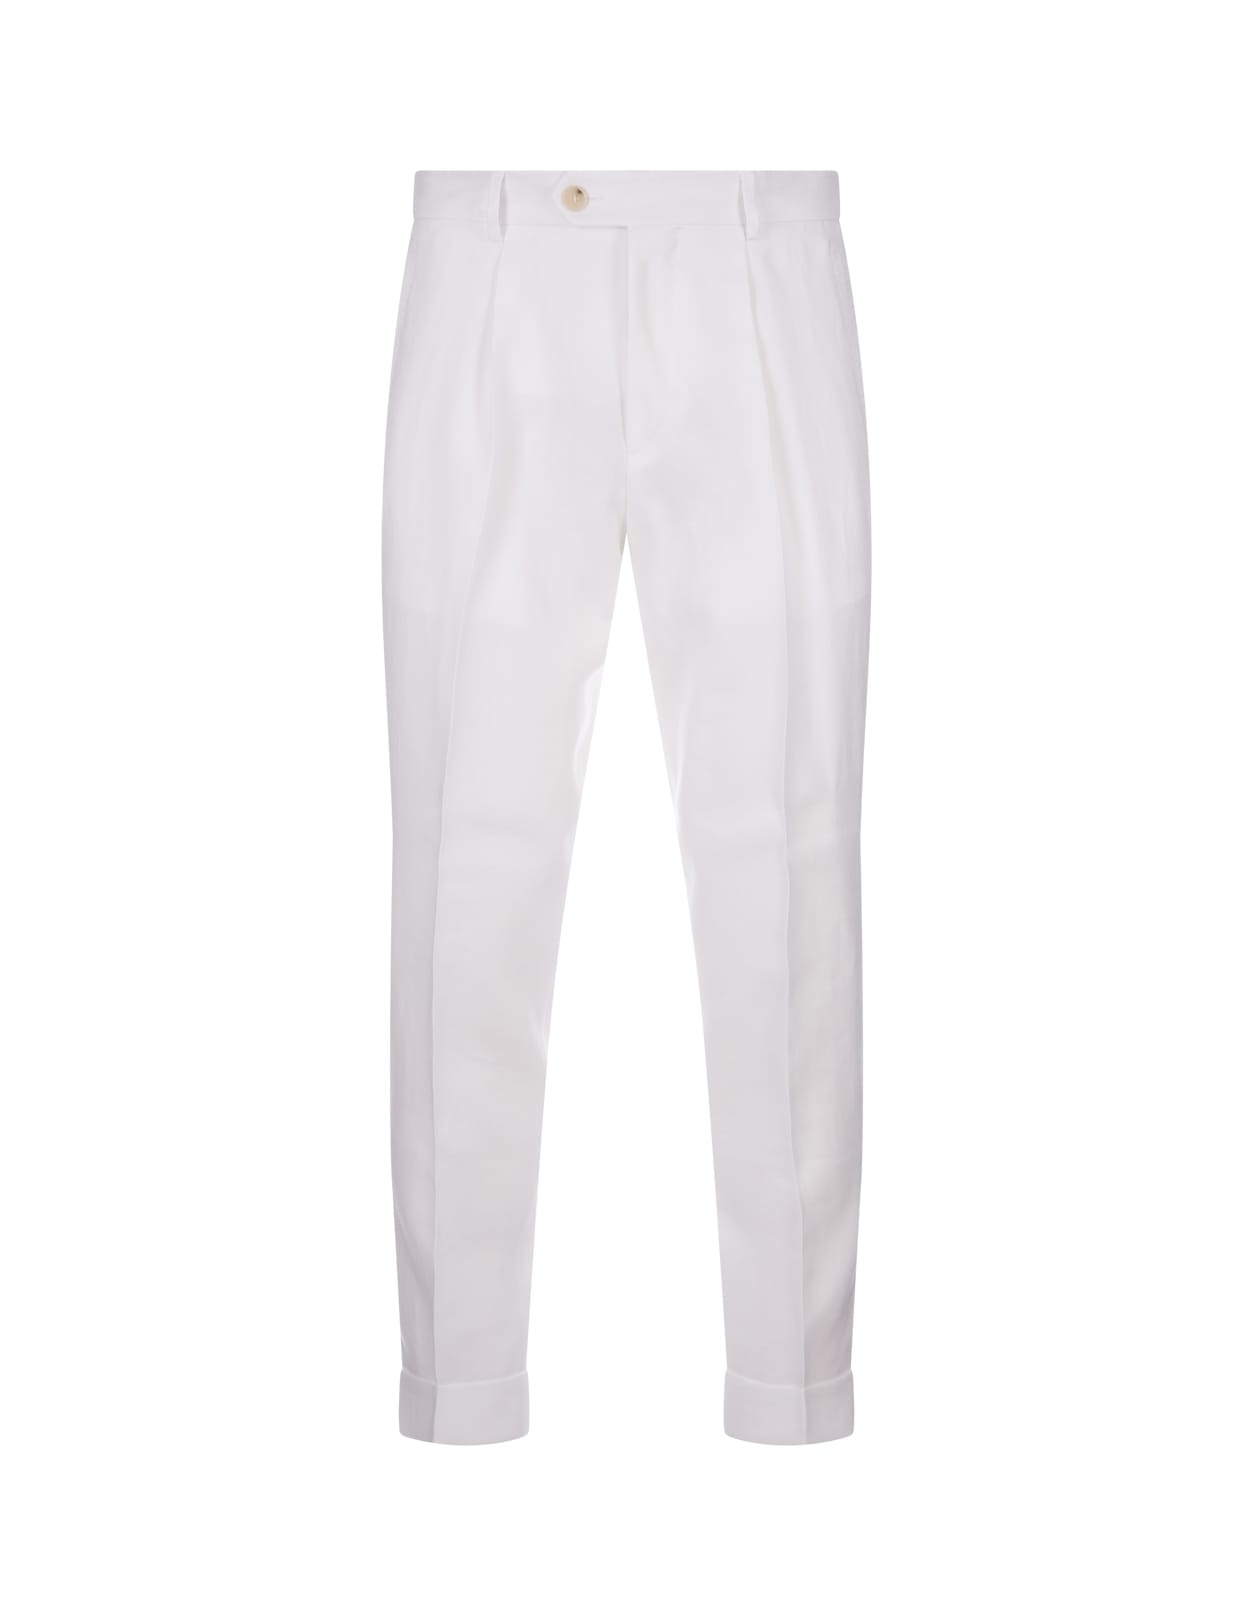 Relaxed Fit Trousers In White Wrinkle Resistant Linen